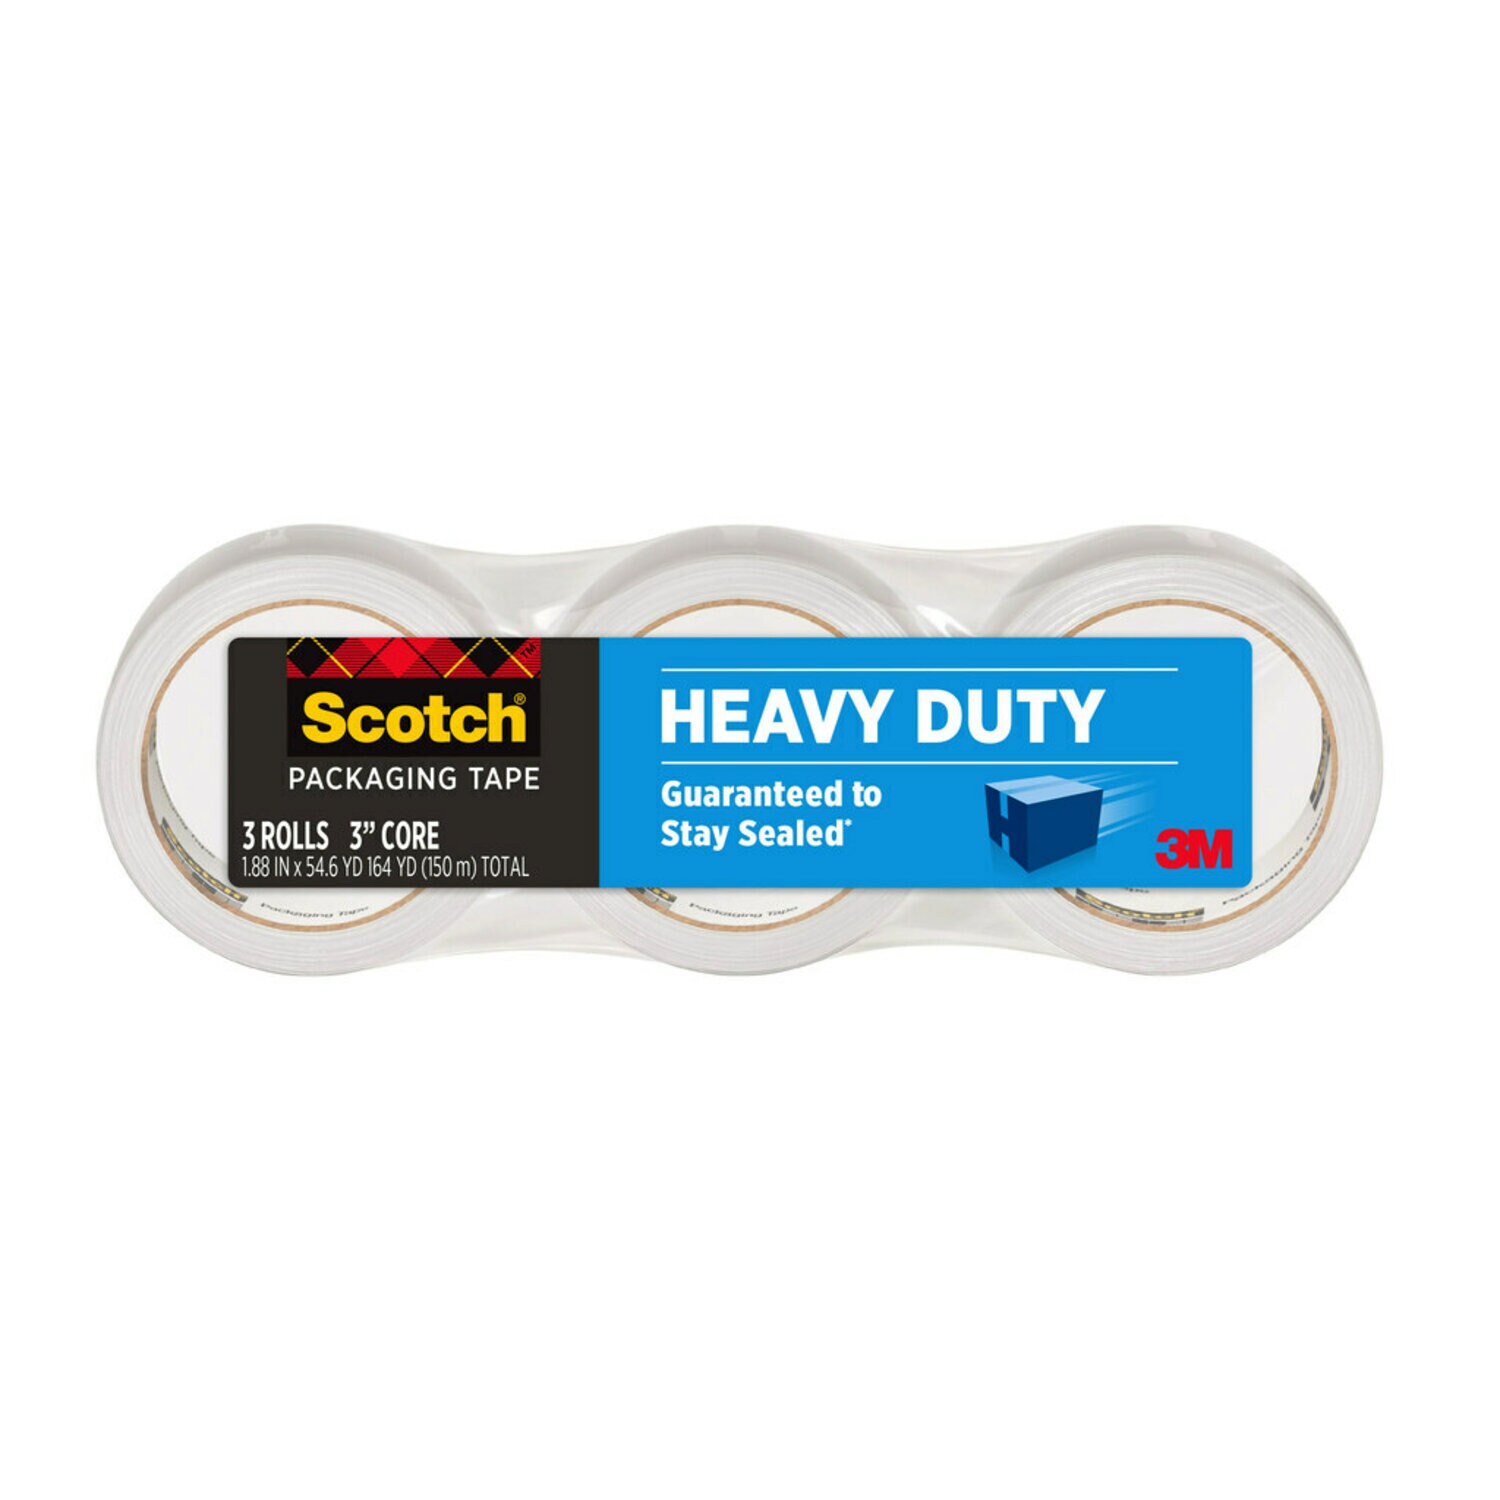 7100102380 - Scotch Heavy Duty Shipping Packaging Tape 3850-3, 1.88 in x 54.6 yd.
(48 mm x 50 m), 3/Pack